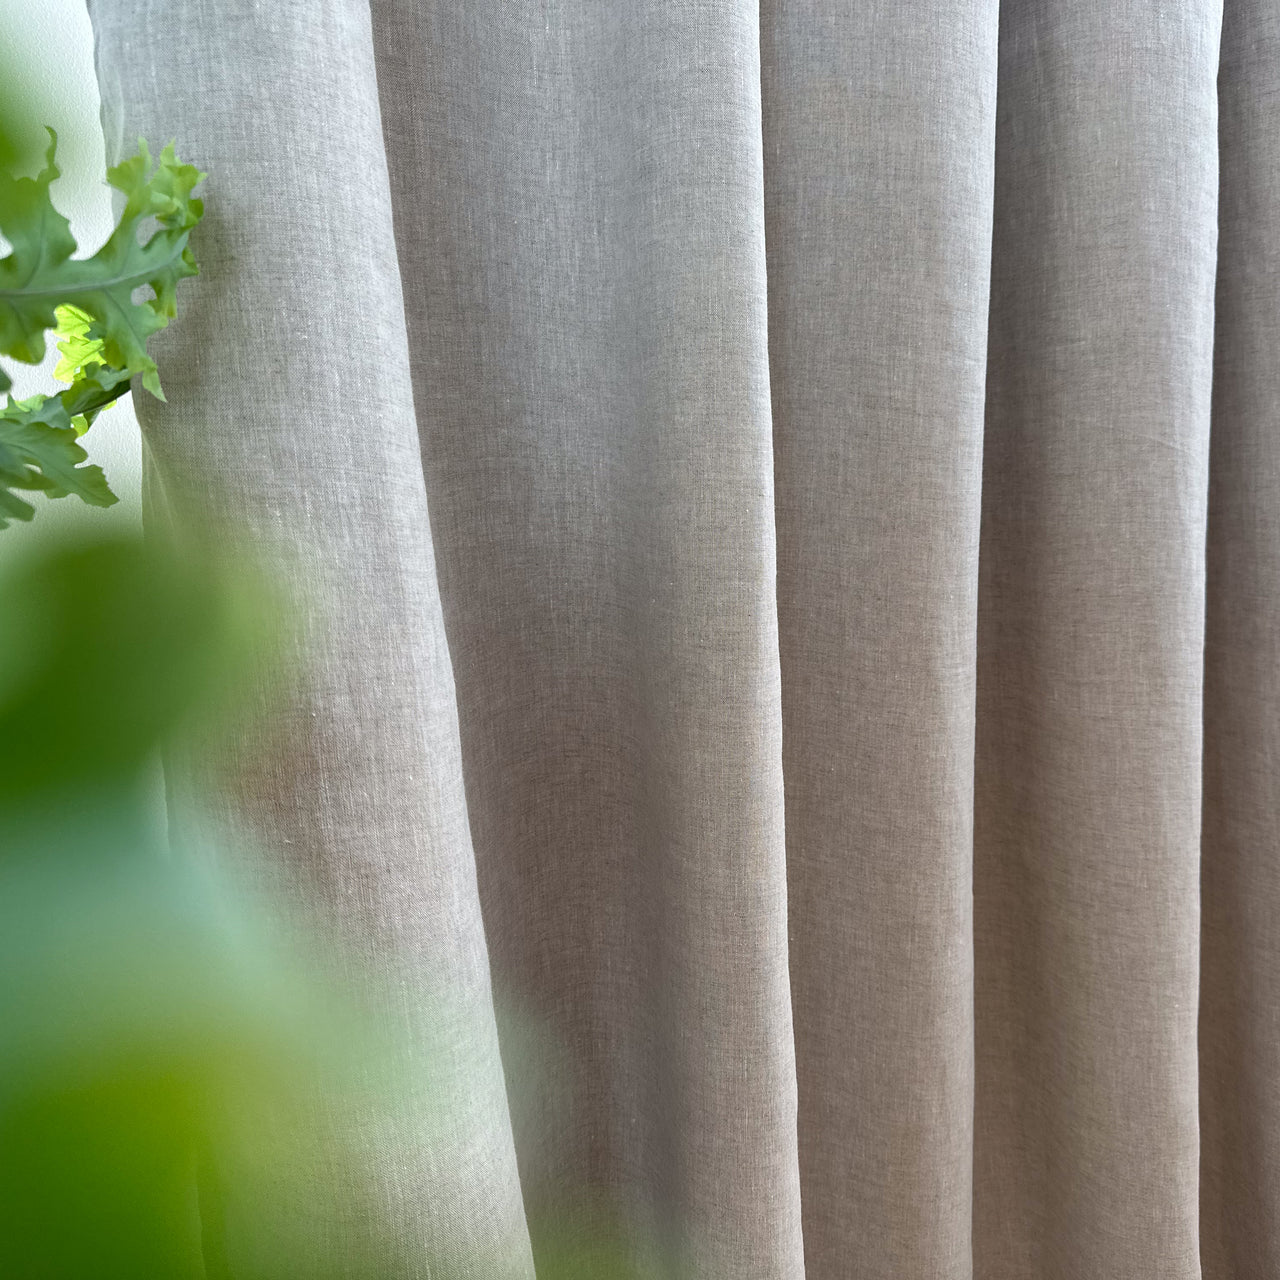 Double Pinch Pleat Linen Curtain with Cotton Lining - Heading for Rings and Hooks - Linen Window Curtain Panel with Privacy Lining